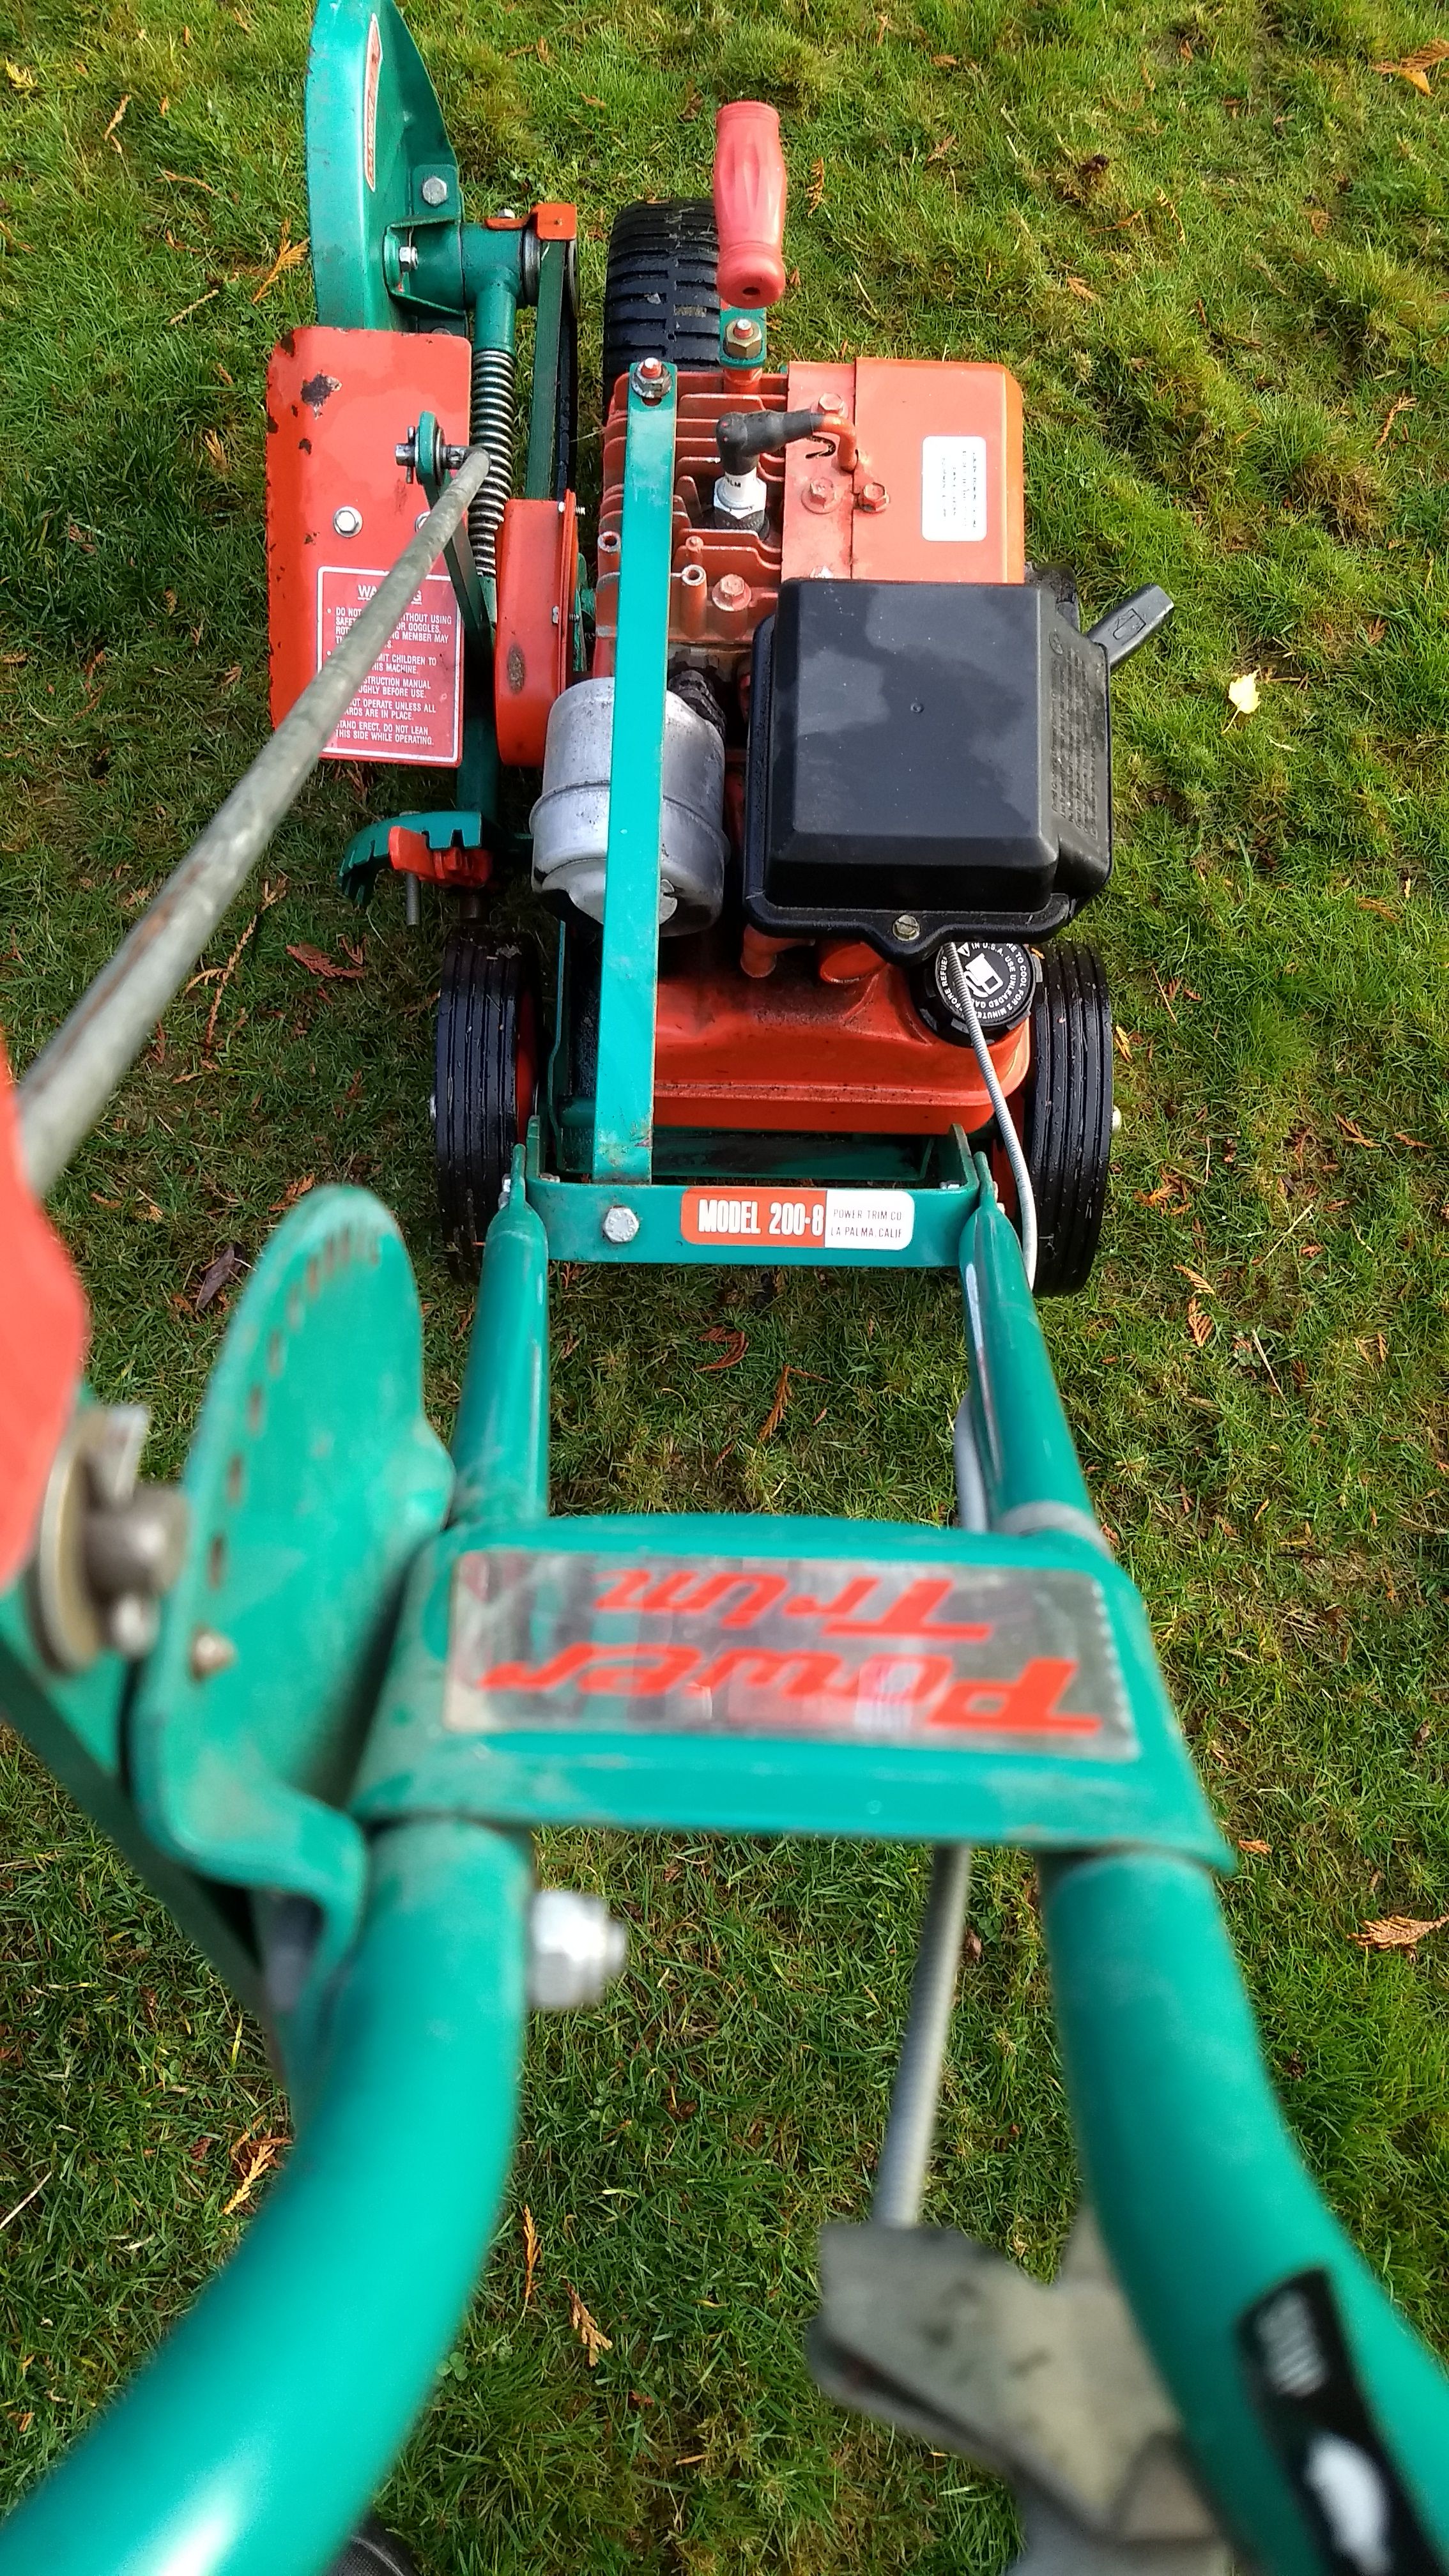 Black and Decker Edge Hog Lawn Edger for Sale in Yelm, WA - OfferUp